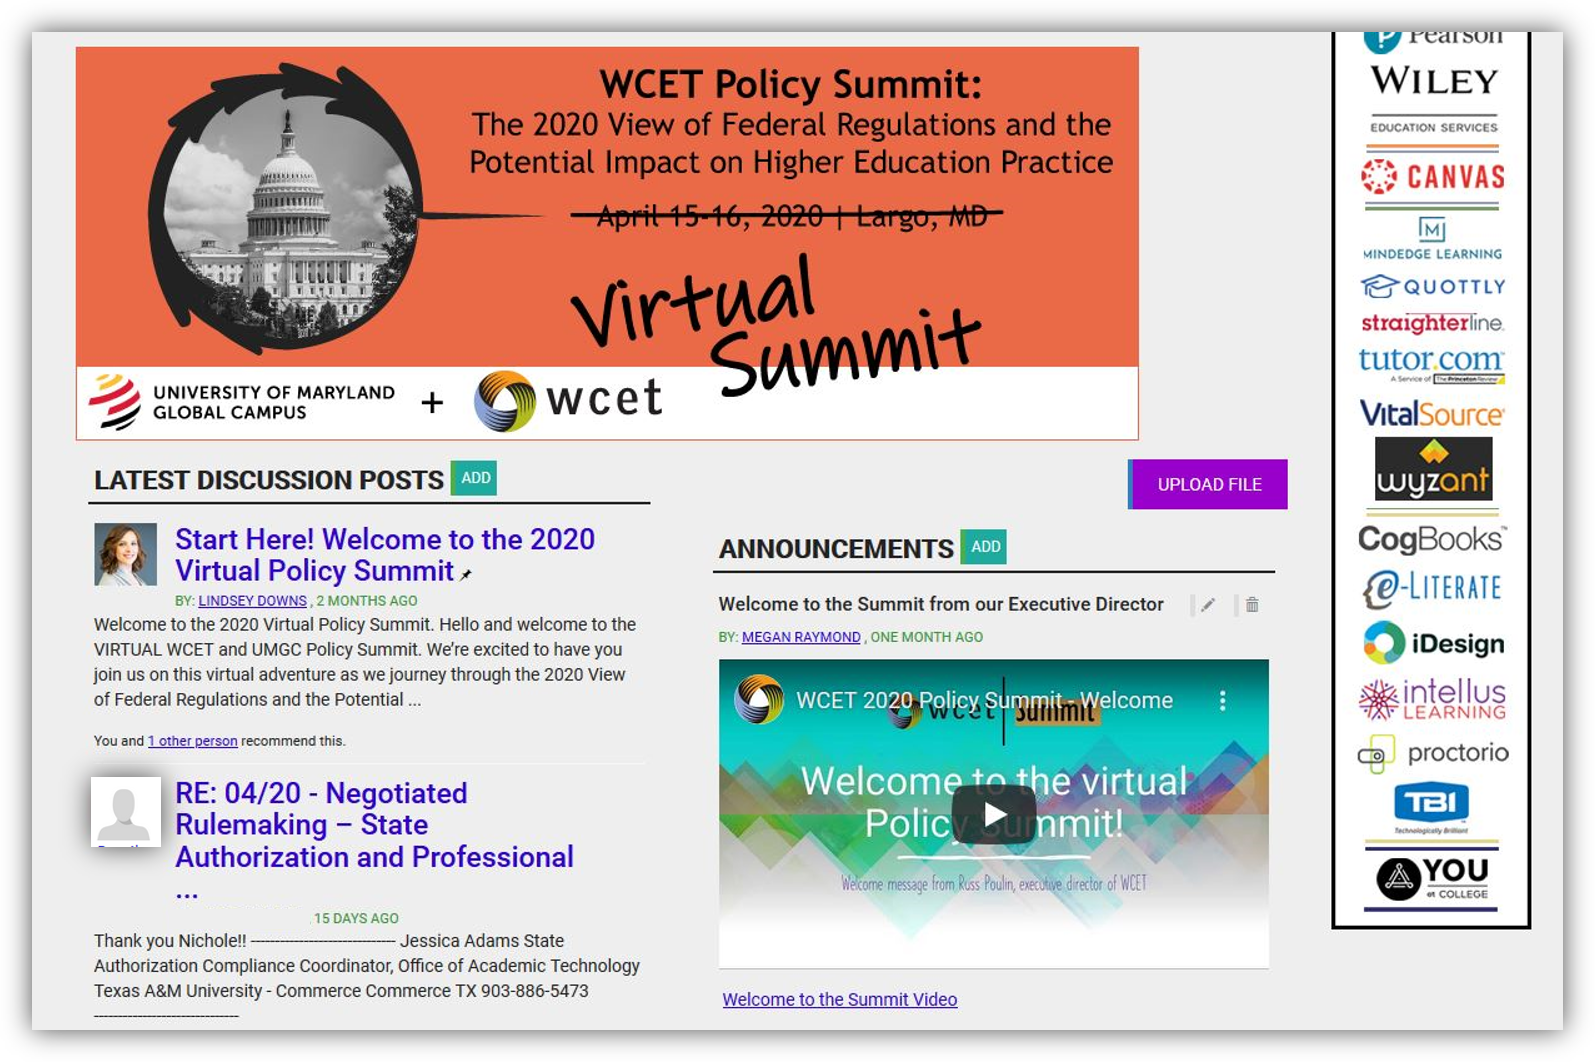 Example of the Summit virtual platform. Shows two example discussion posts, the welcome video from the WCET executive director, and the summit logo.